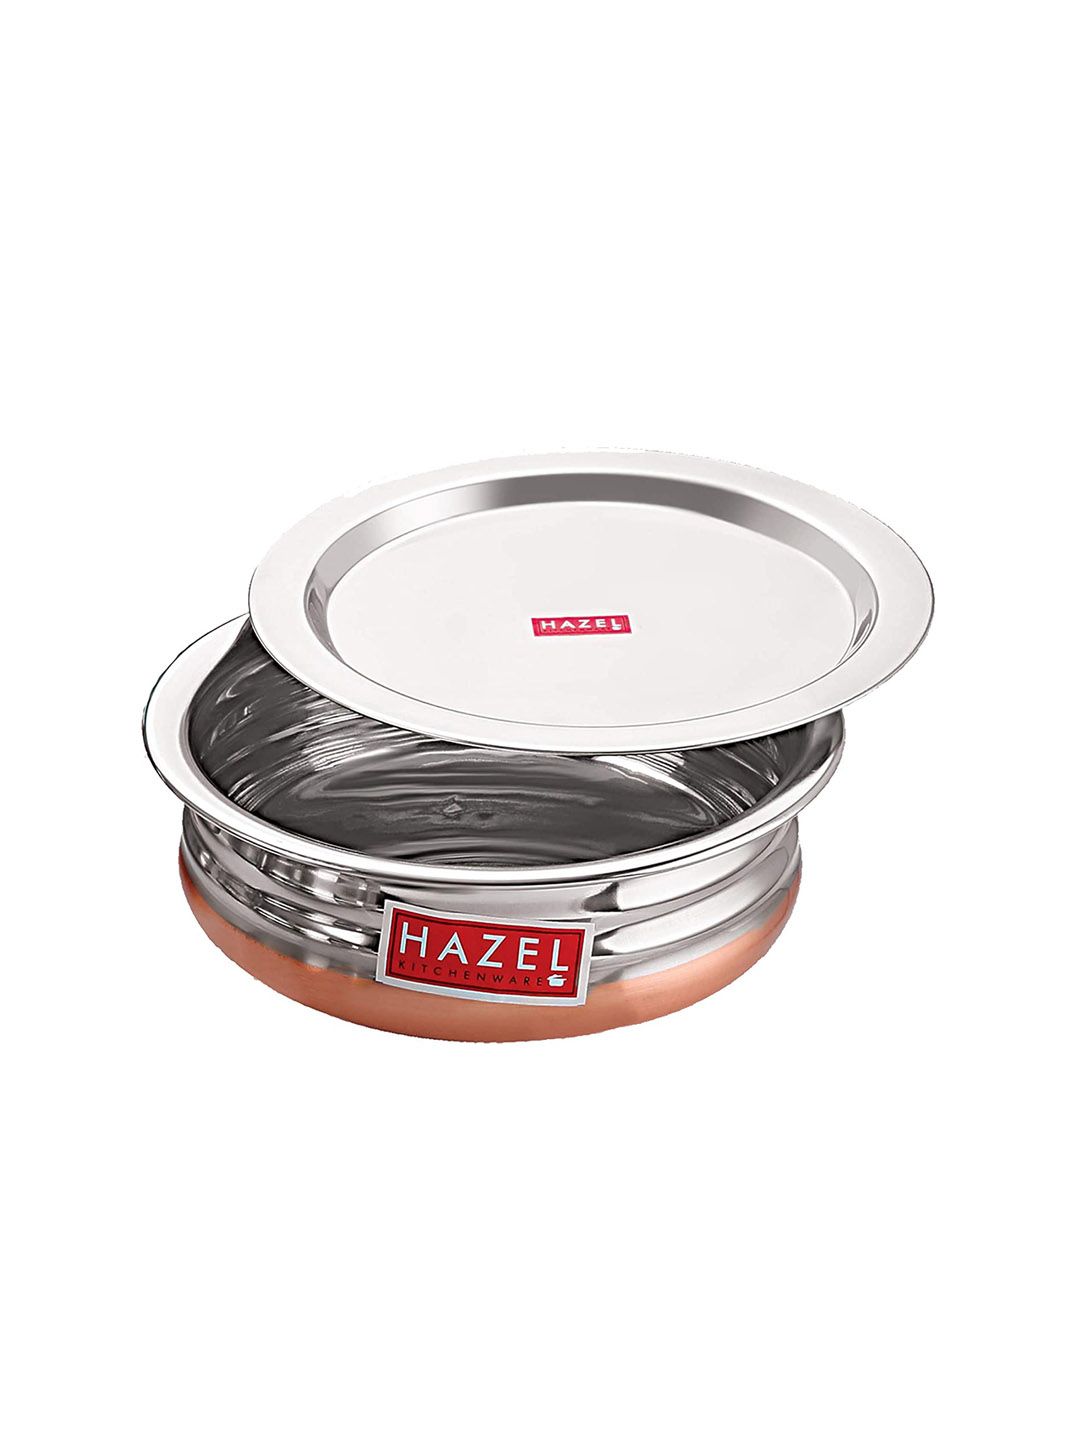 HAZEL Silver-Toned Solid Copper Bottom Stainless Steel Handi With Lid Price in India